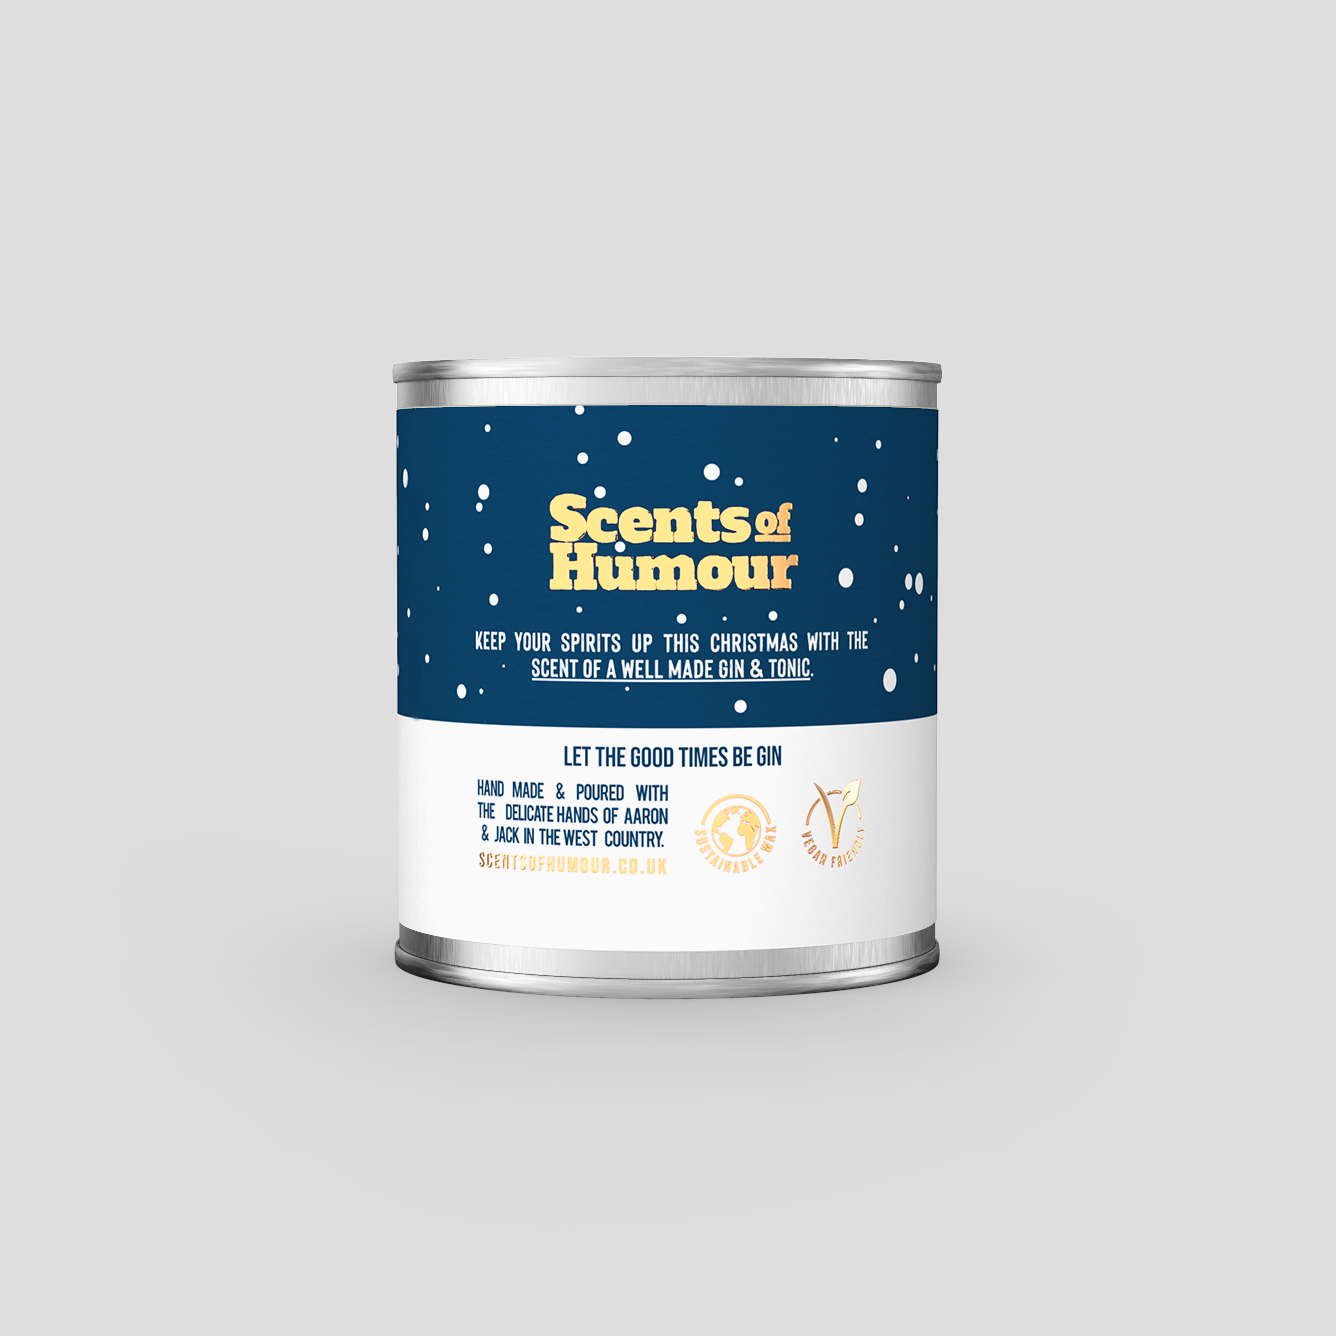 Gingle Bells - Gin & Tonic Scented Candle